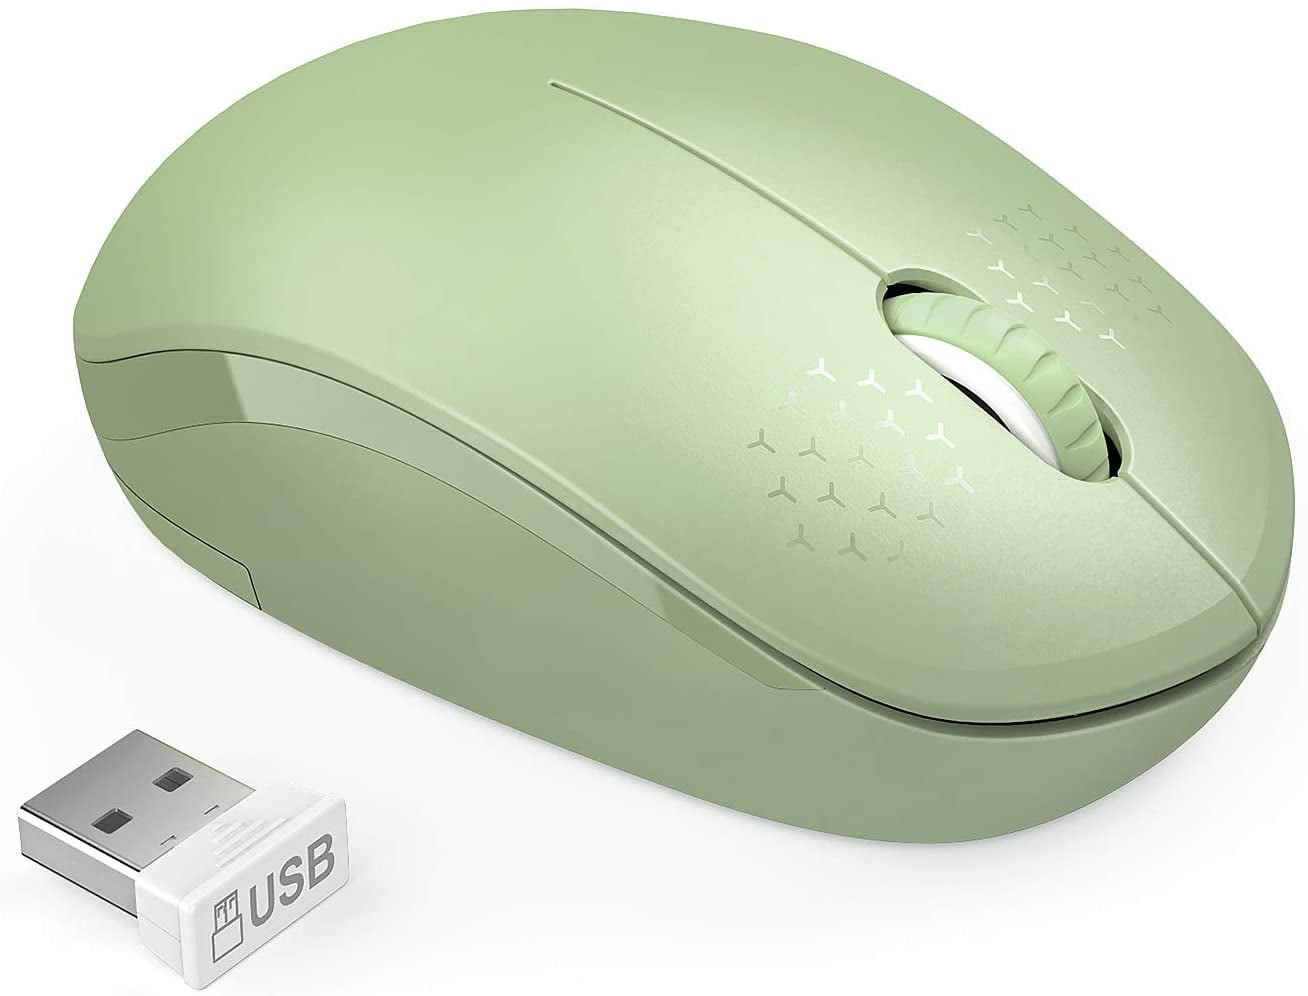 Green Optical Mouse/Mice 2.4GHz Wireless USB 2.0 Receiver For PC Laptop Computer 